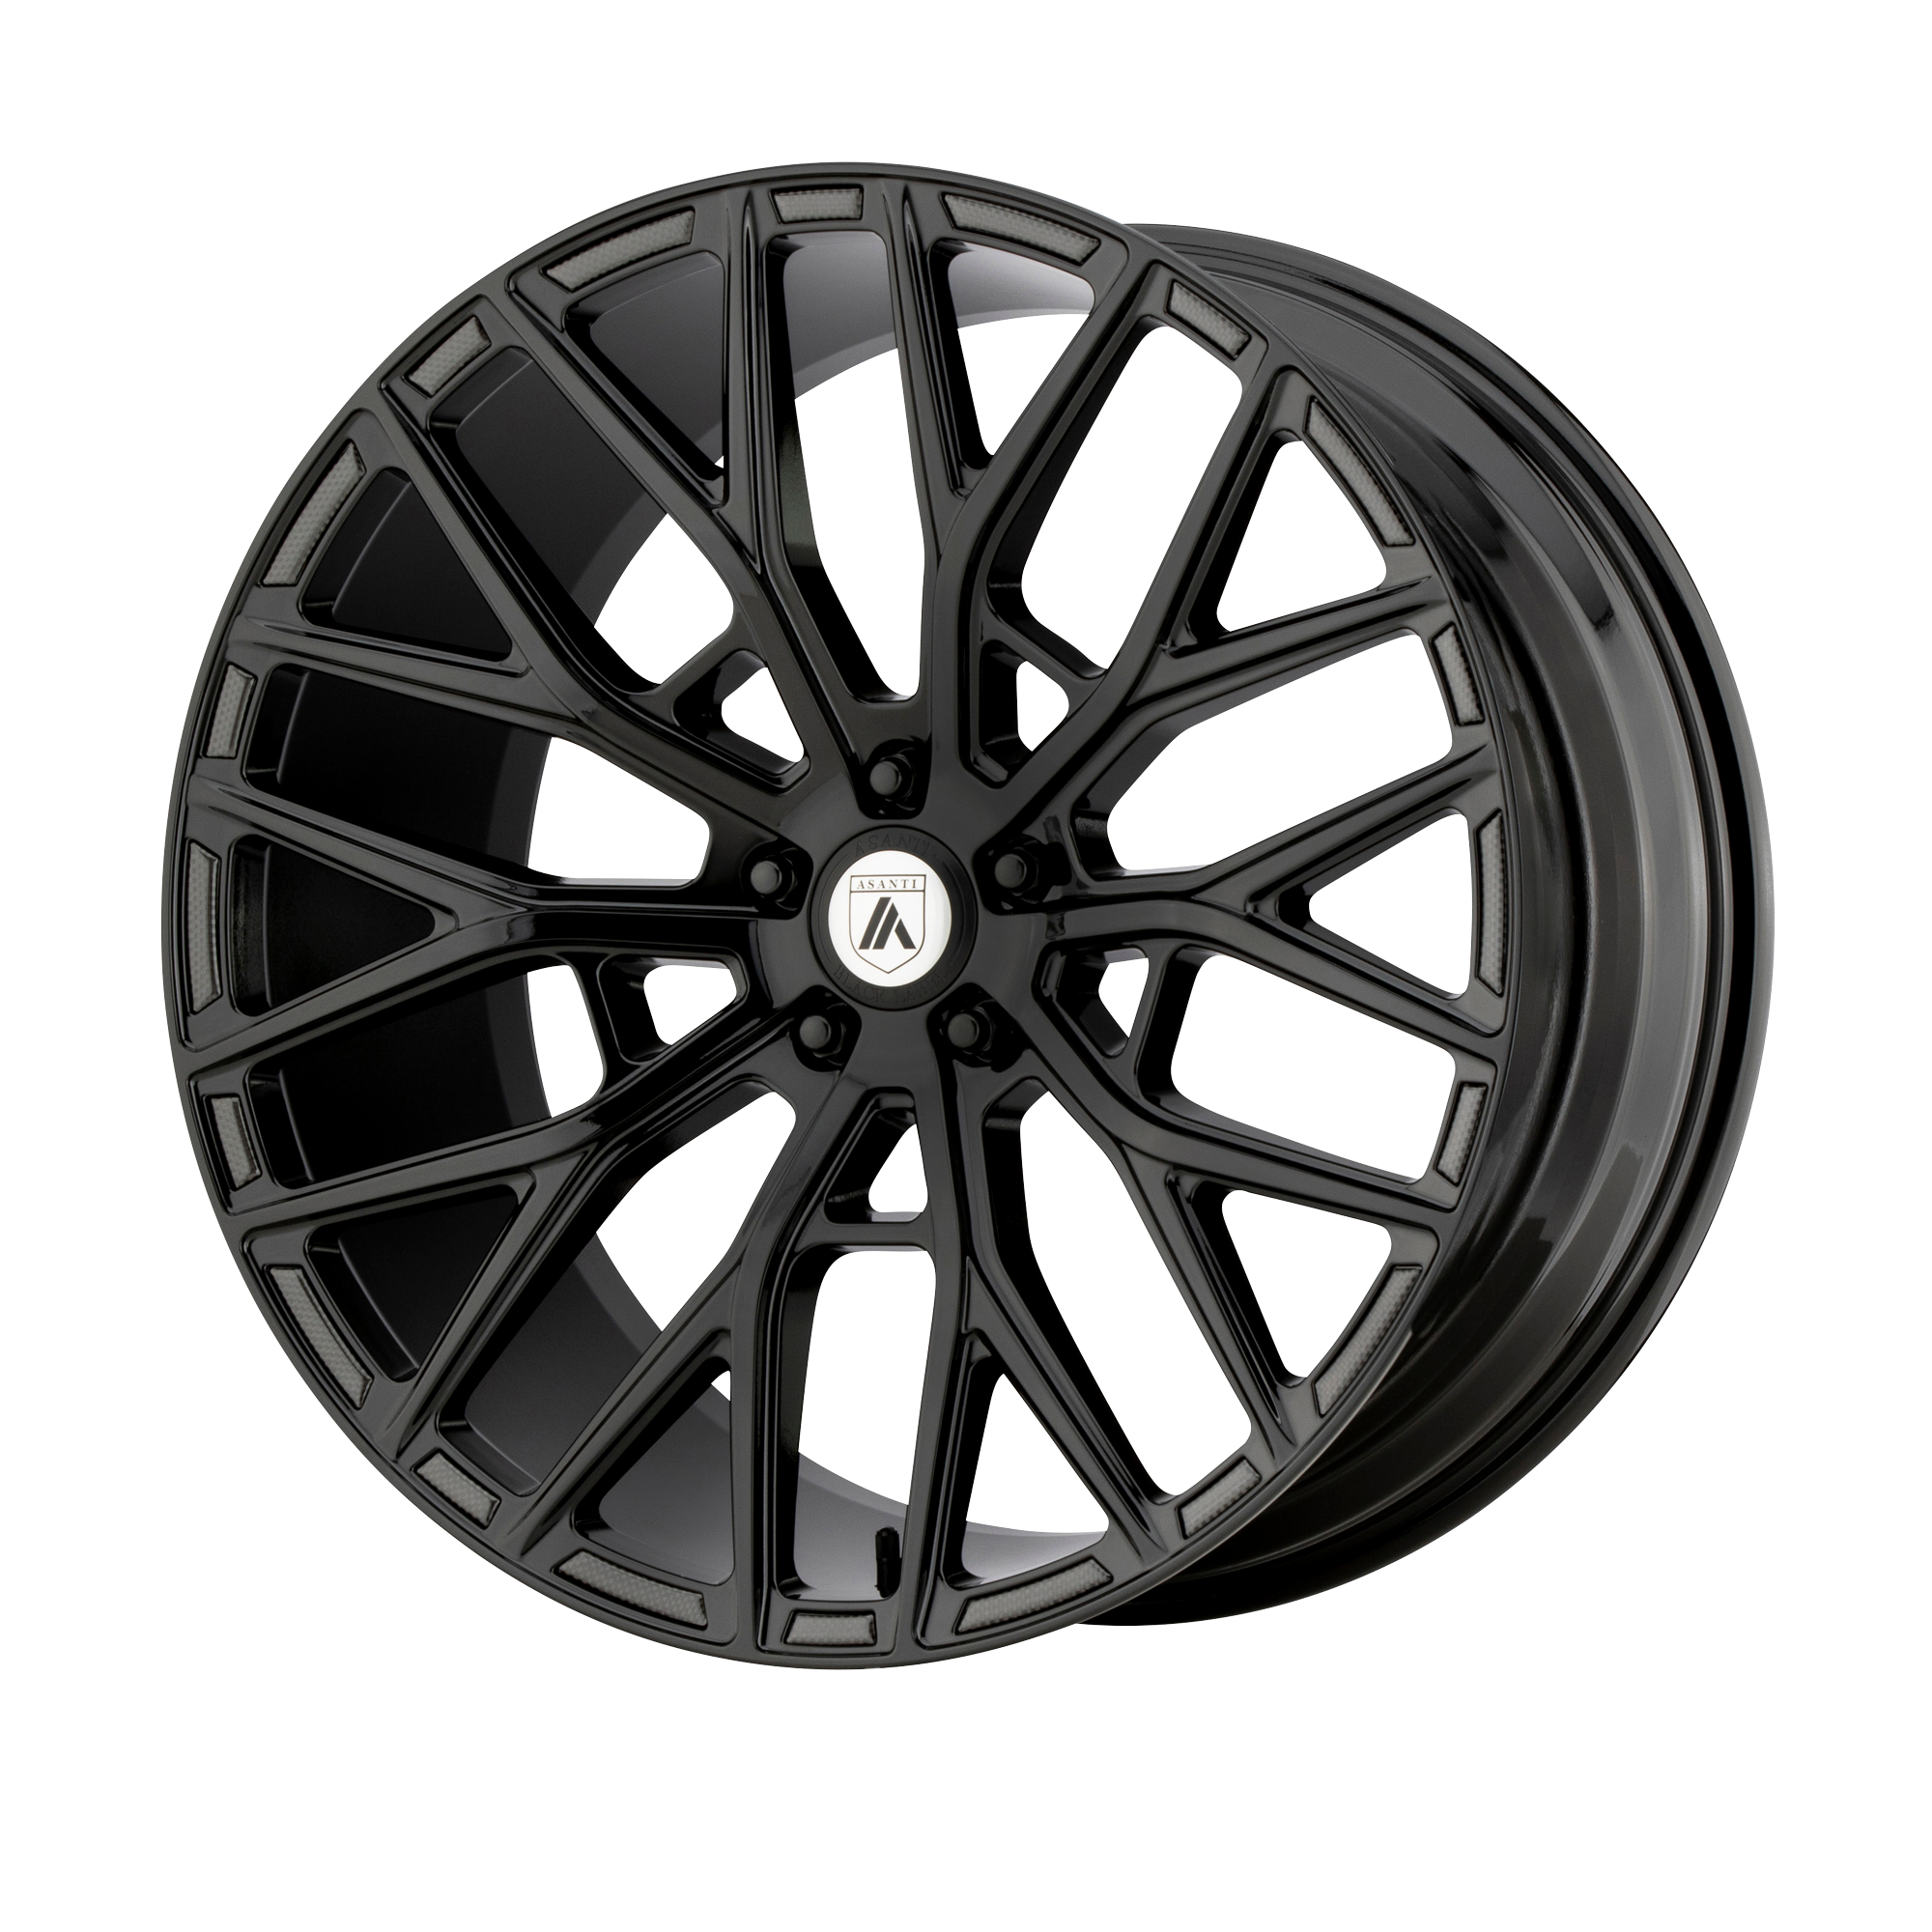 LEO 20x9 5x114.30 GLOSS BLACK (35 mm) - Tires and Engine Performance